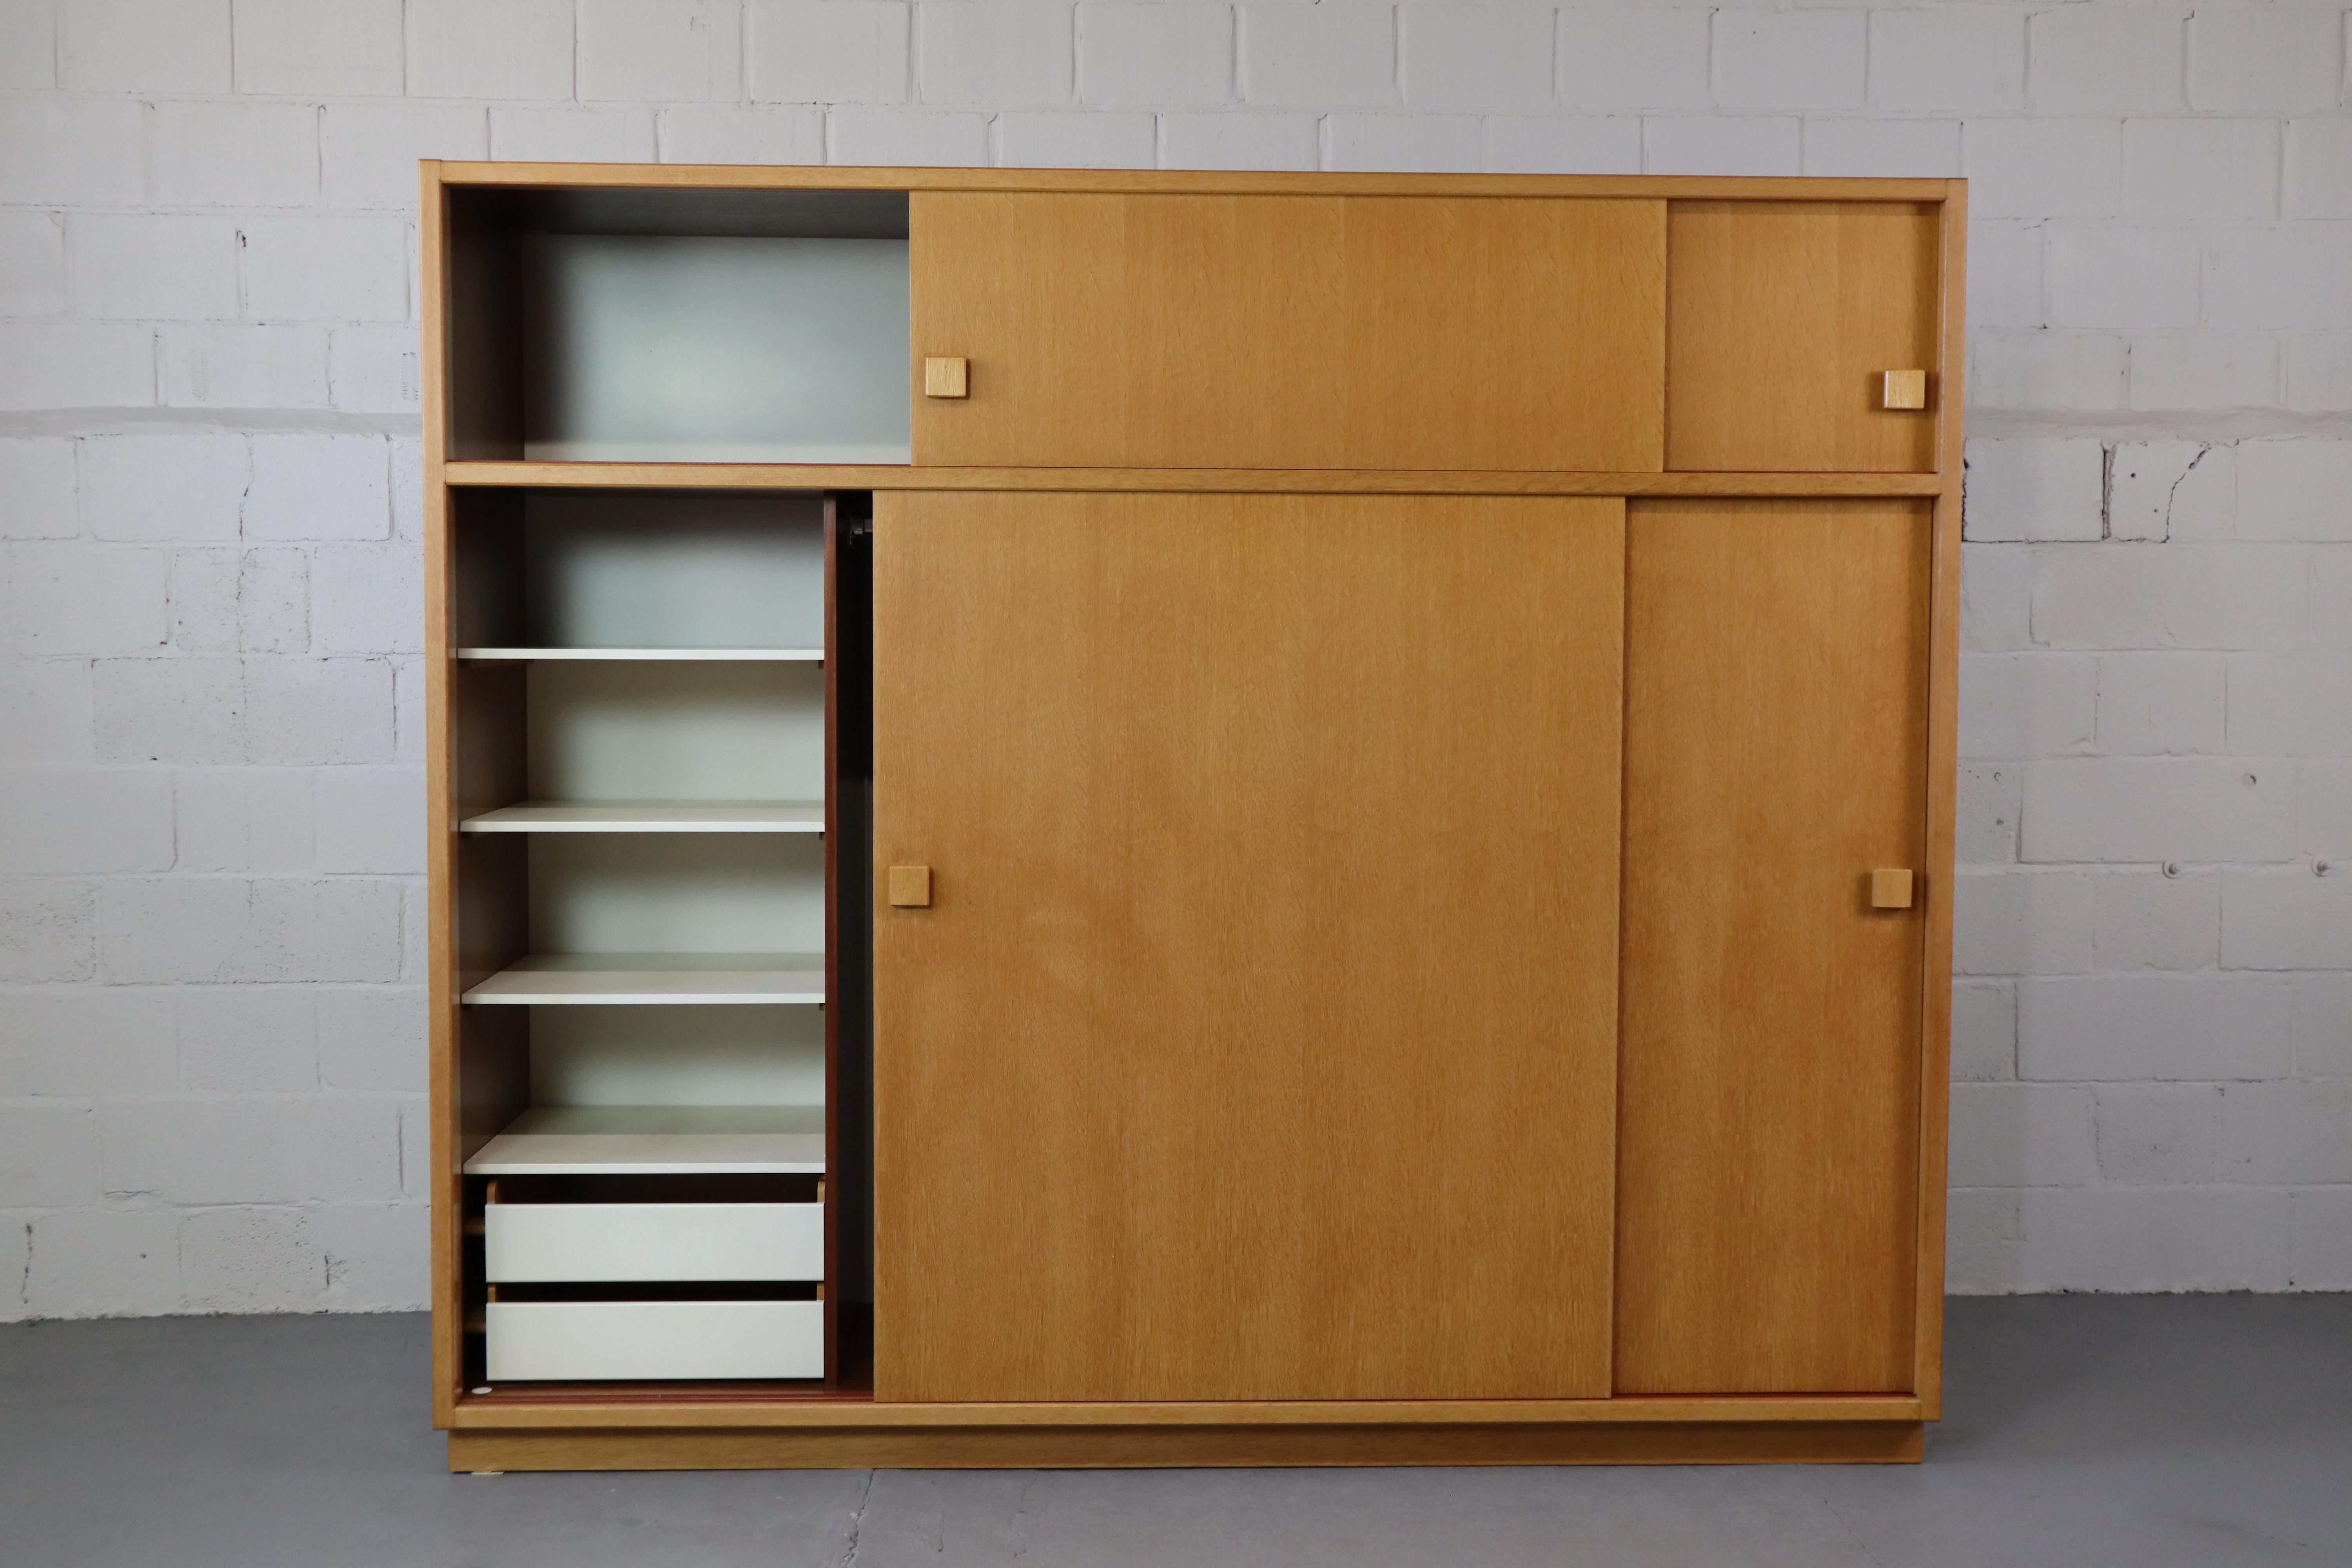 Large minimalist wardrobe by Bob Van den Berghe for Van den Berghe-Pauvers, 1969
The wardrobe has 4 sliding doors, 2 drawers, clothes hanging area and various shelves.
The cabinet is very high-quality in solid oak and oak veneer.
The cabinet can